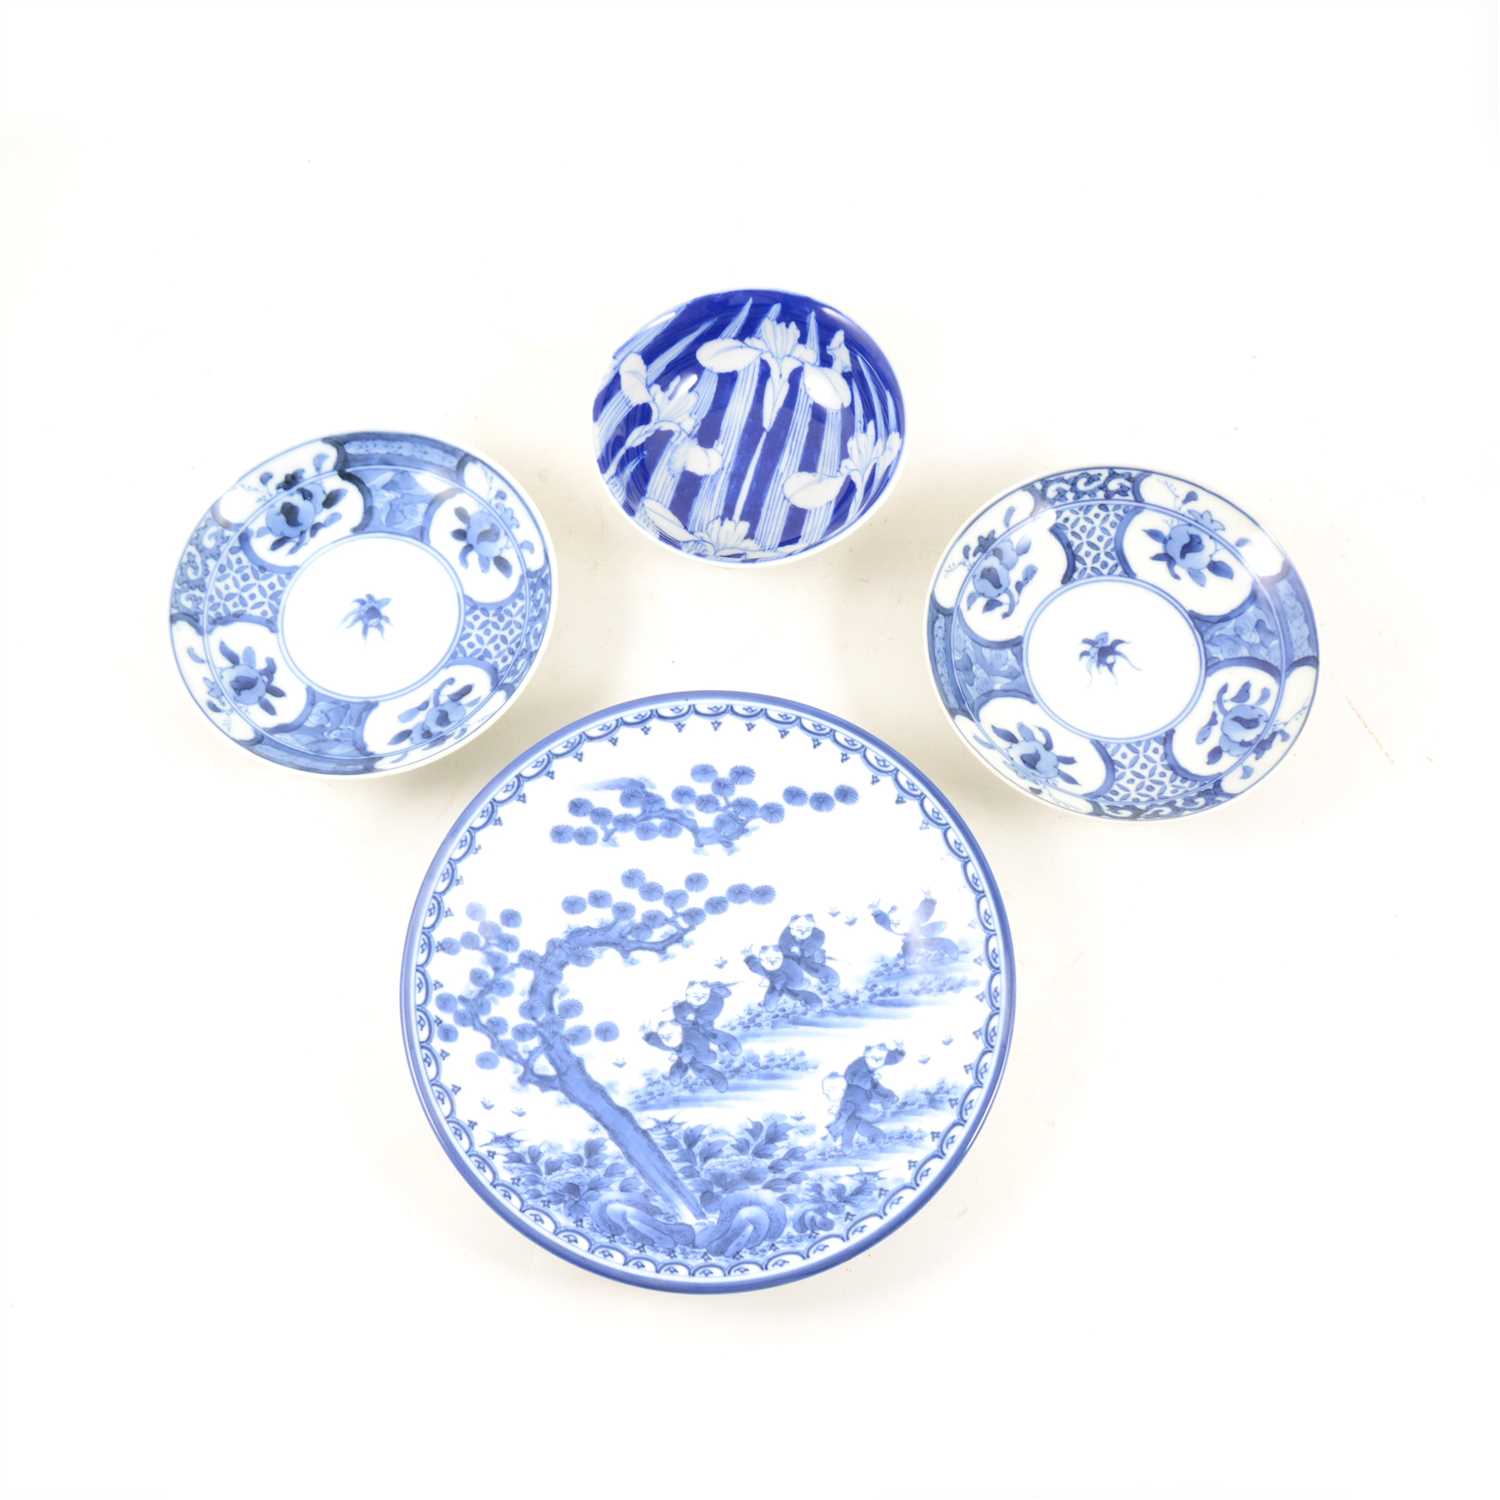 Lot 52 - A collection of Japanese blue and white plates and dishes, to include two with dragon design to centre, 21.8cm diameter, and a set of three with floral design, 14.8cm.